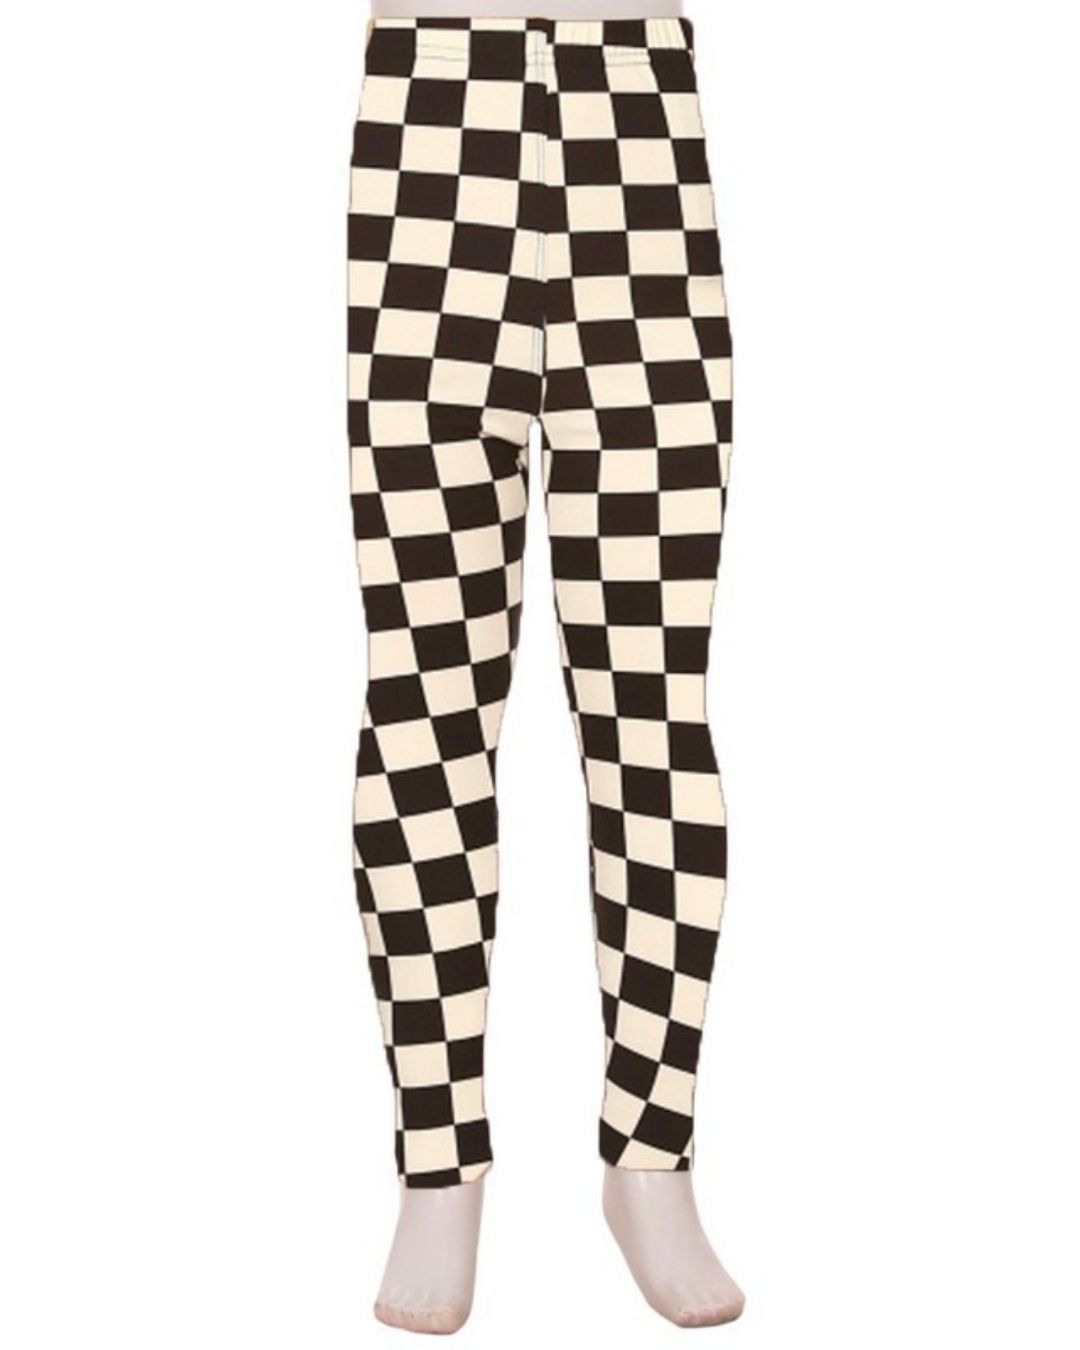 Chasing Checkers Youth Leggings - White